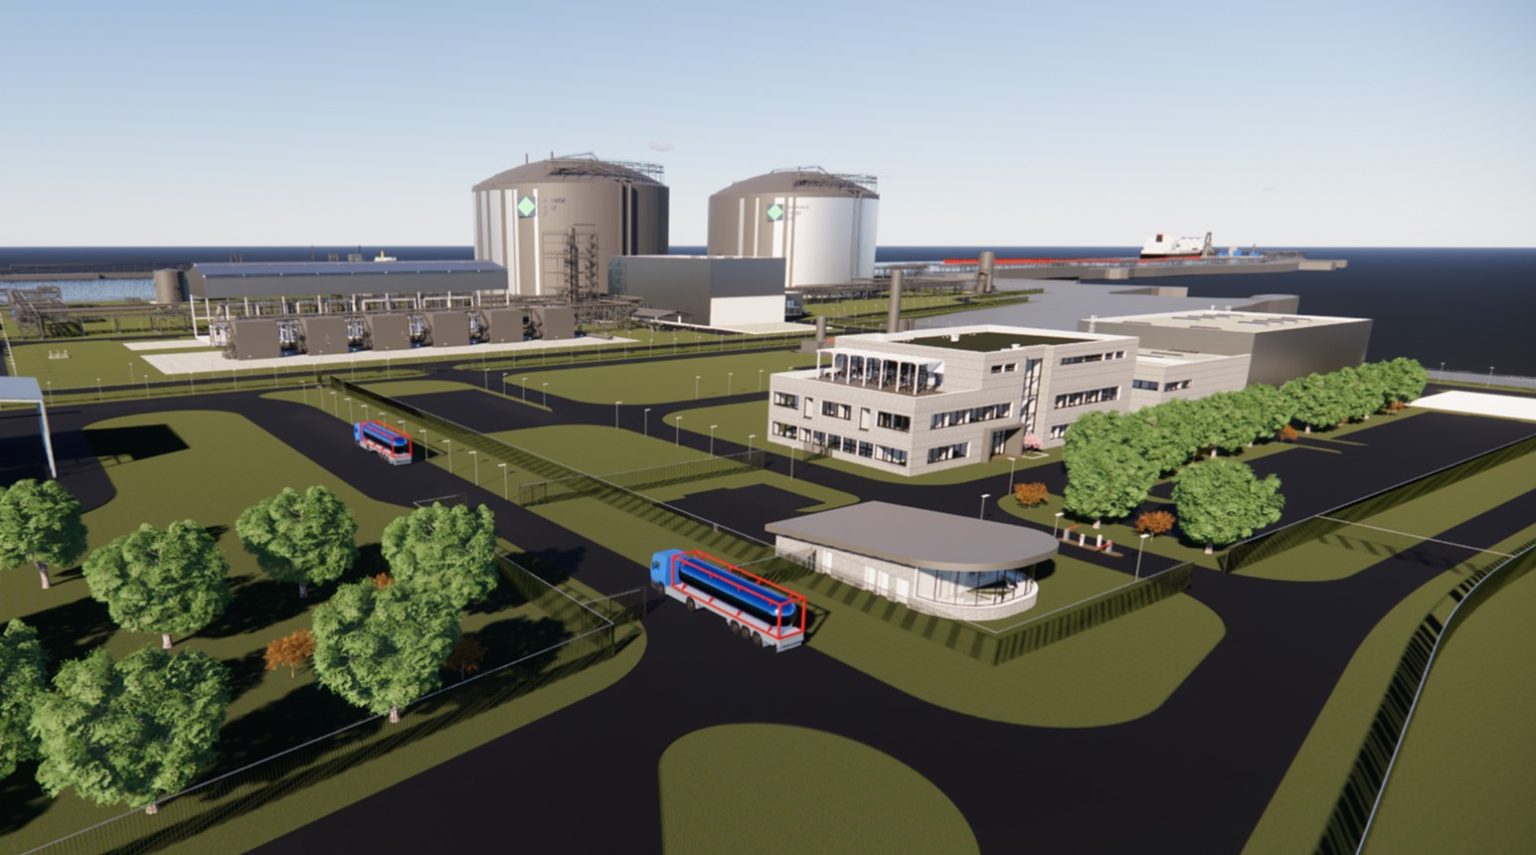 CEZ books capacity at HEH’s Stade LNG terminal in Germany